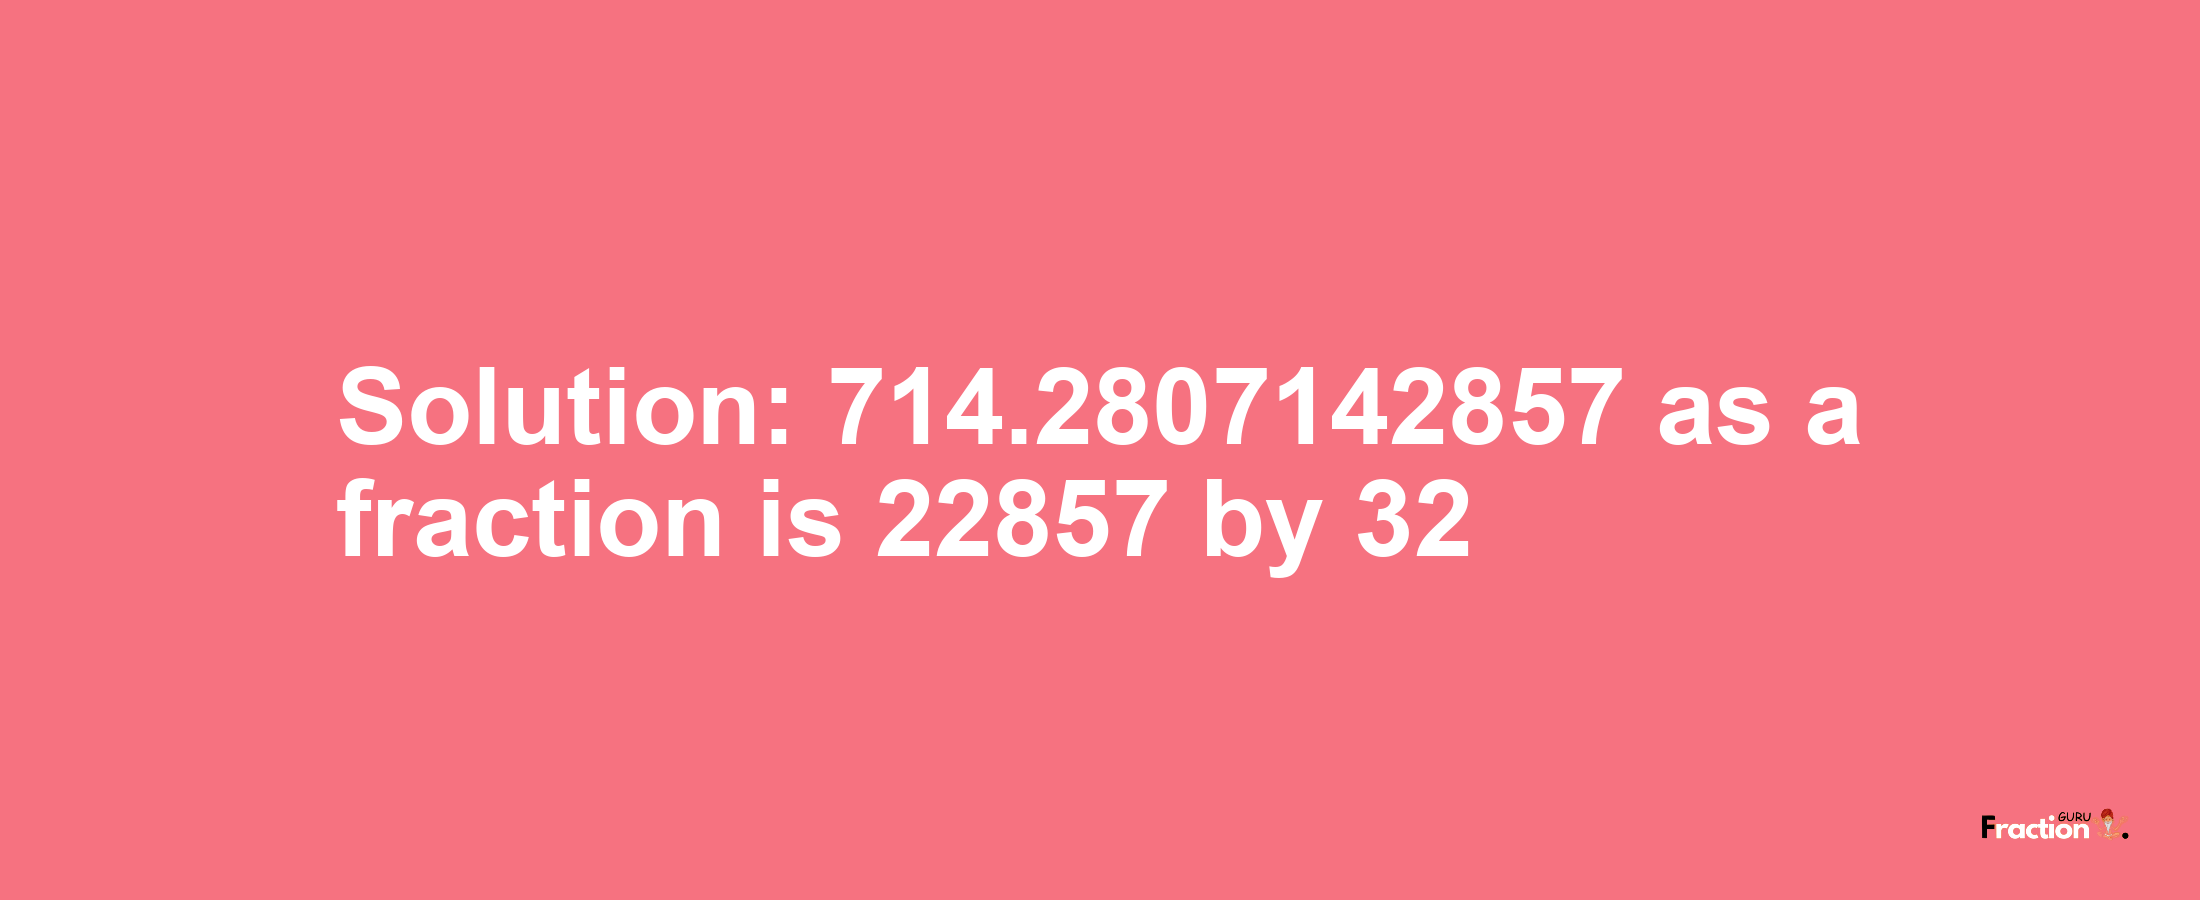 Solution:714.2807142857 as a fraction is 22857/32